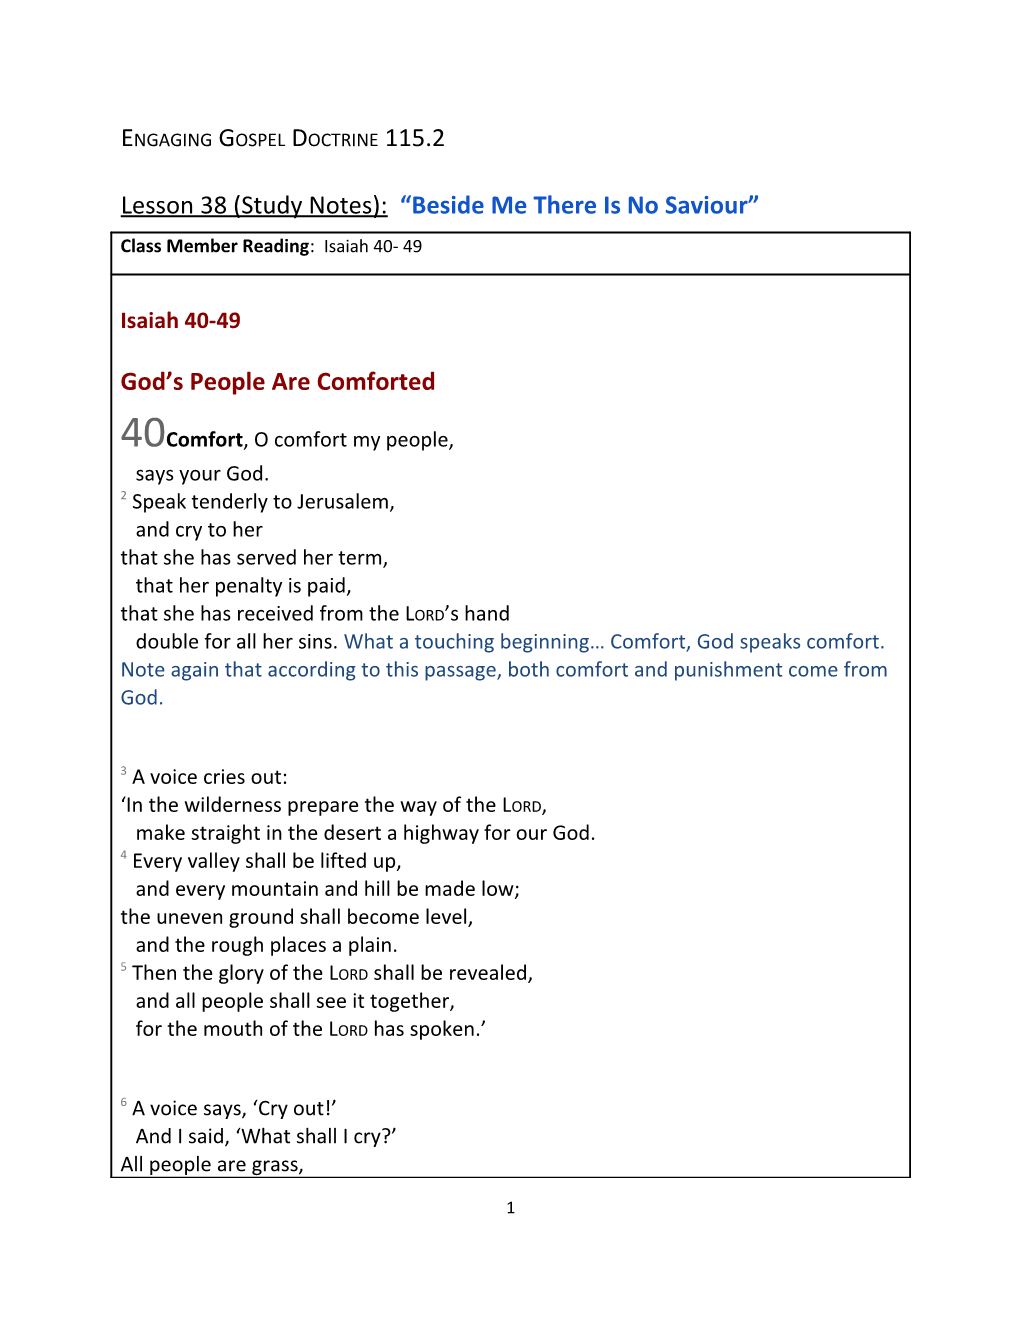 Lesson 38 (Study Notes): Beside Me There Is No Saviour